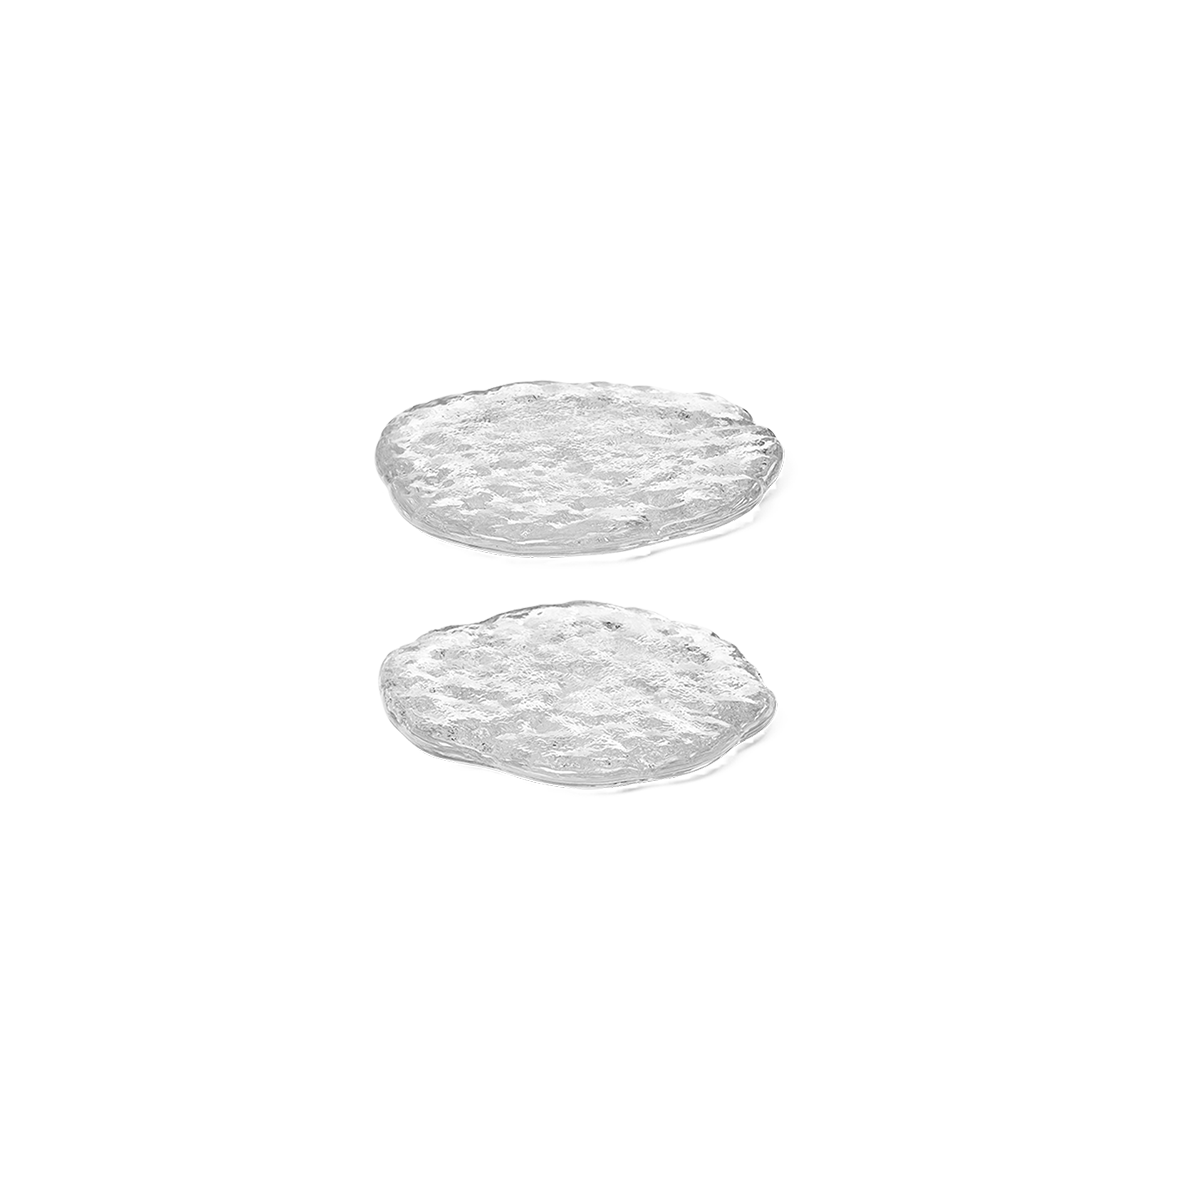 Momento Glass Stones - Small - Set of 2 - Clear